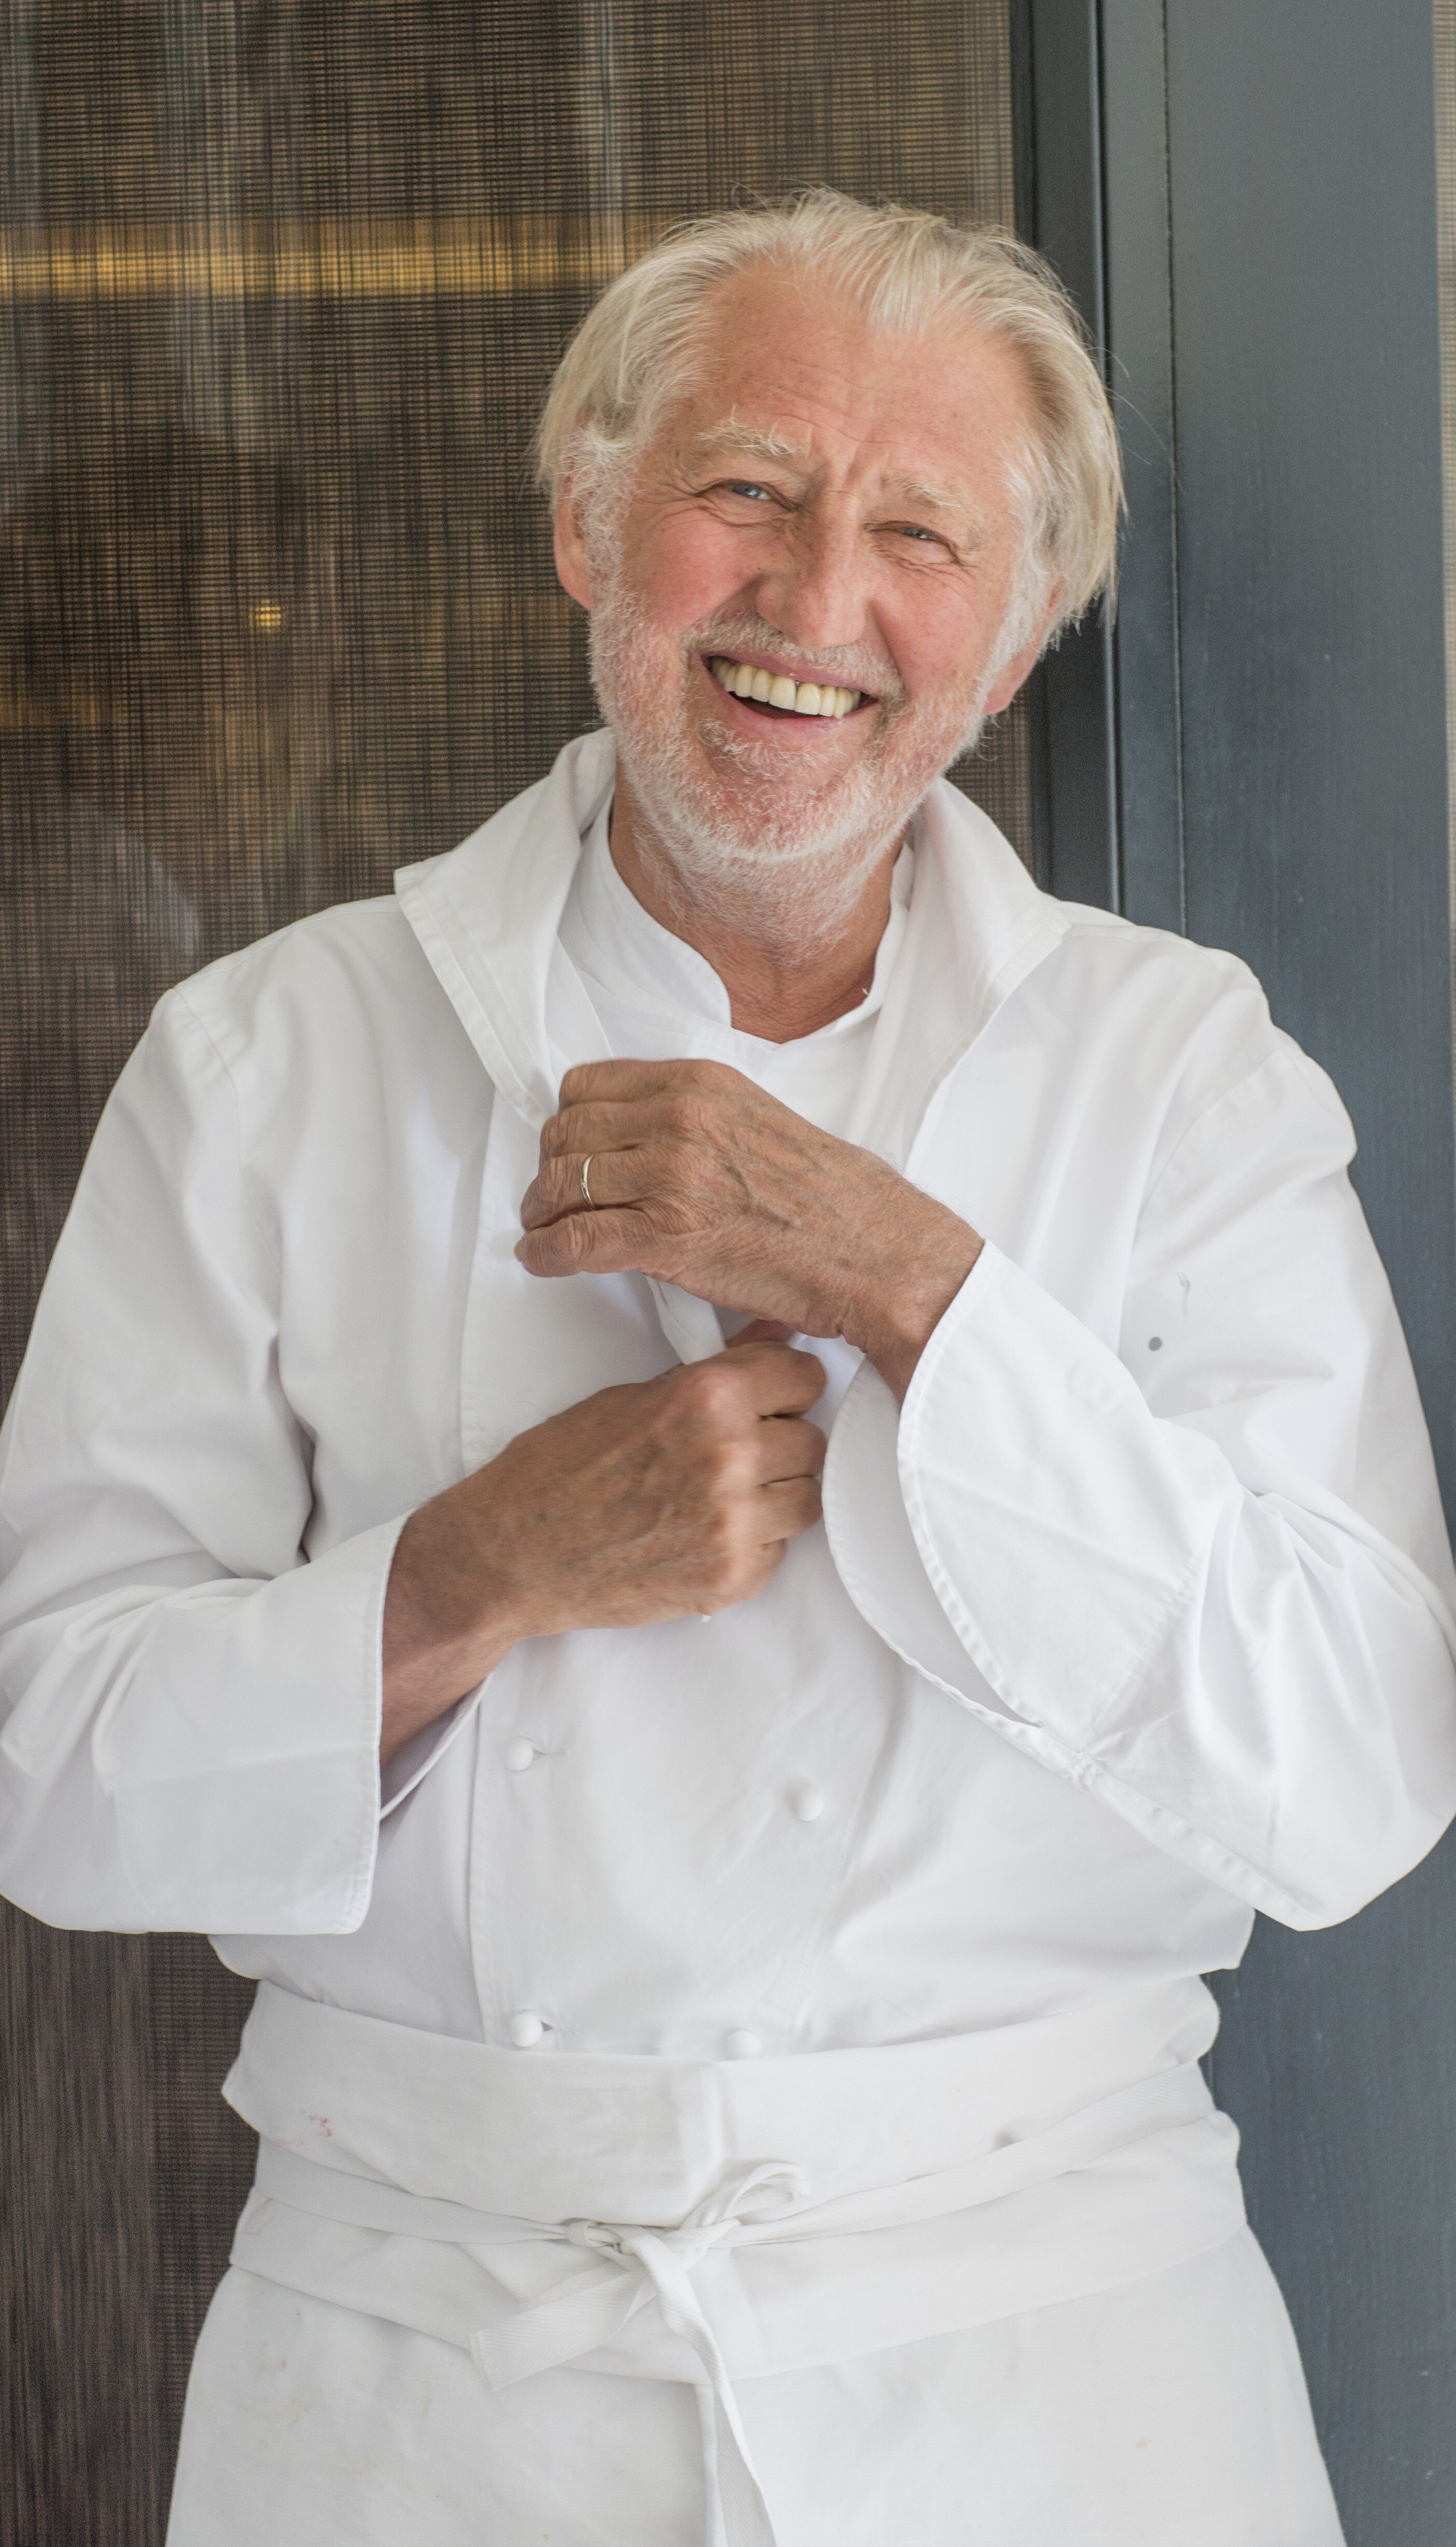 ‘I think being yourself is very useful. And the advantage is that it’s less tiring,’ says Pierre Gagnaire. Photo: Jacques Gavard